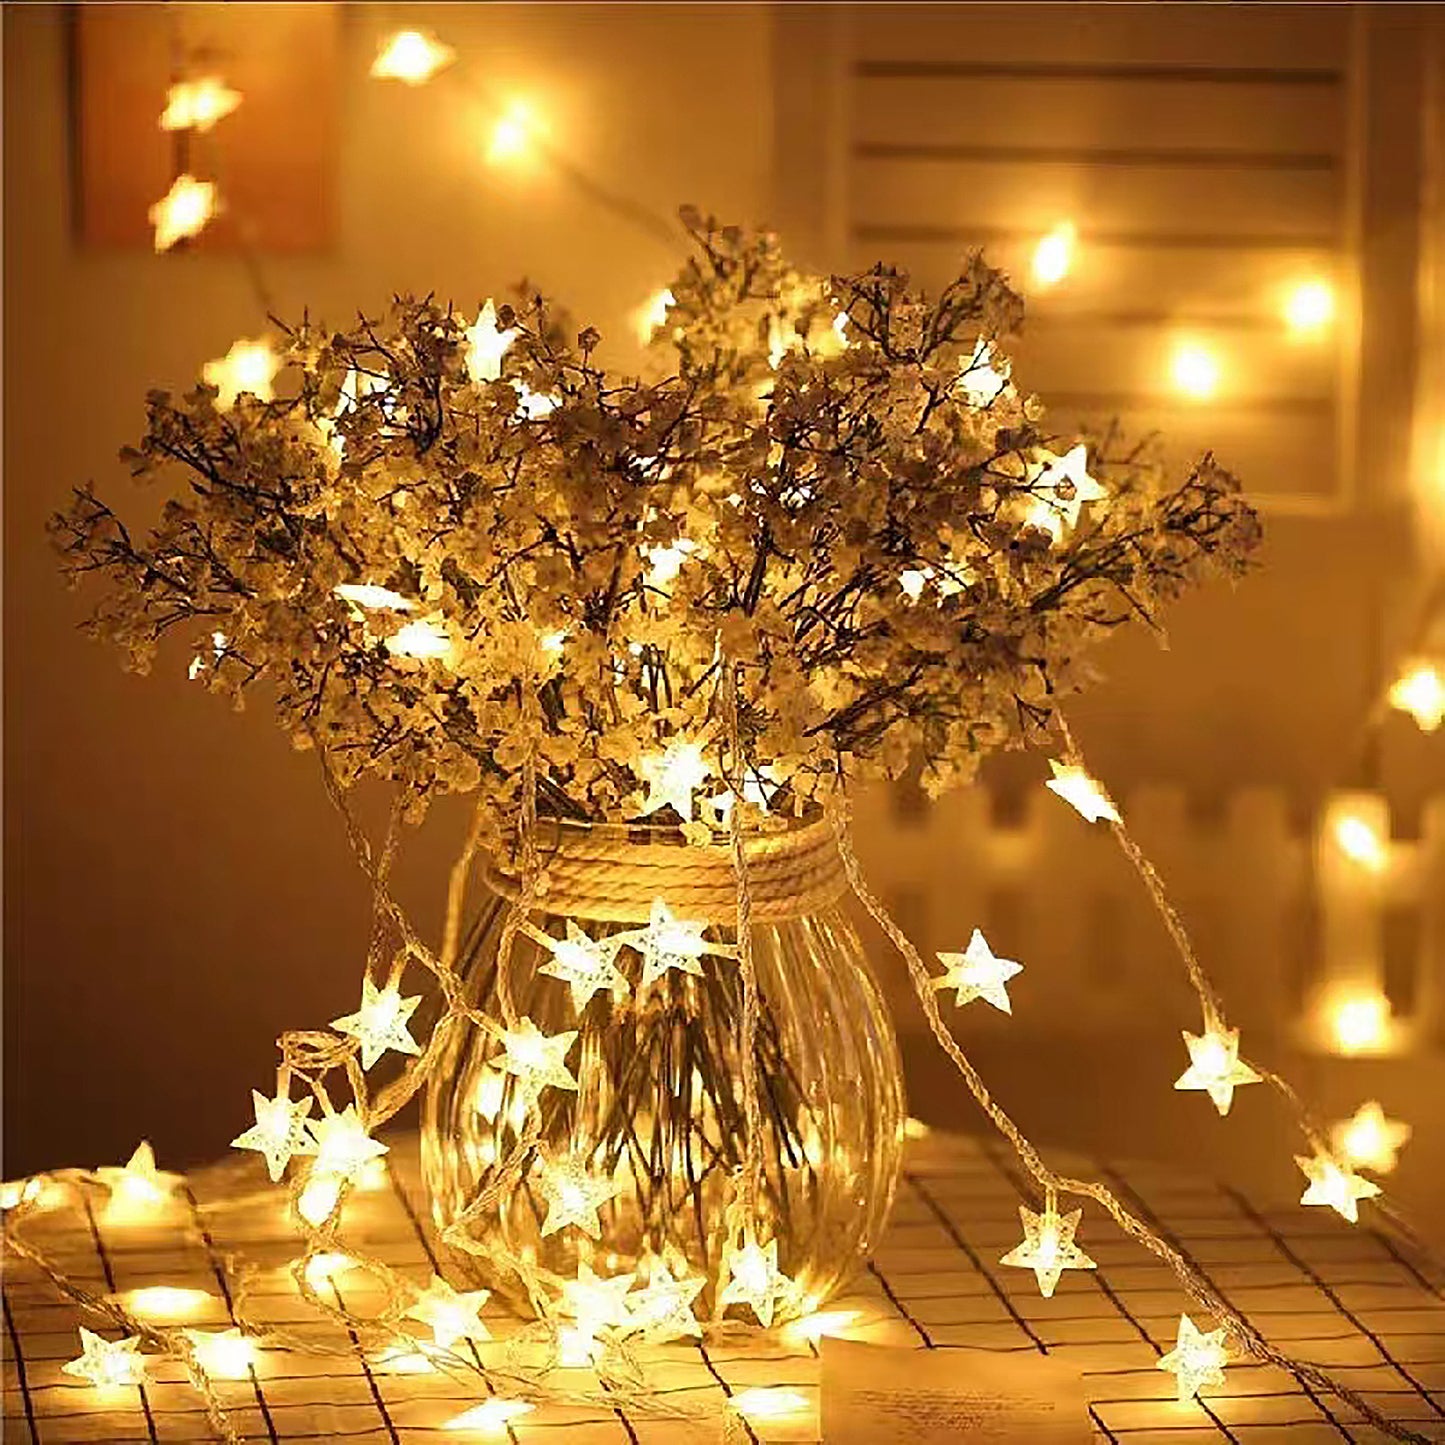 Star led Lights,Girls Room Decor Aesthetic Romantic Christmas Tree Decorations Indoor & Outdoor 2 Pack 10FT Fairy Night Light with Sound Remote Control Warm White